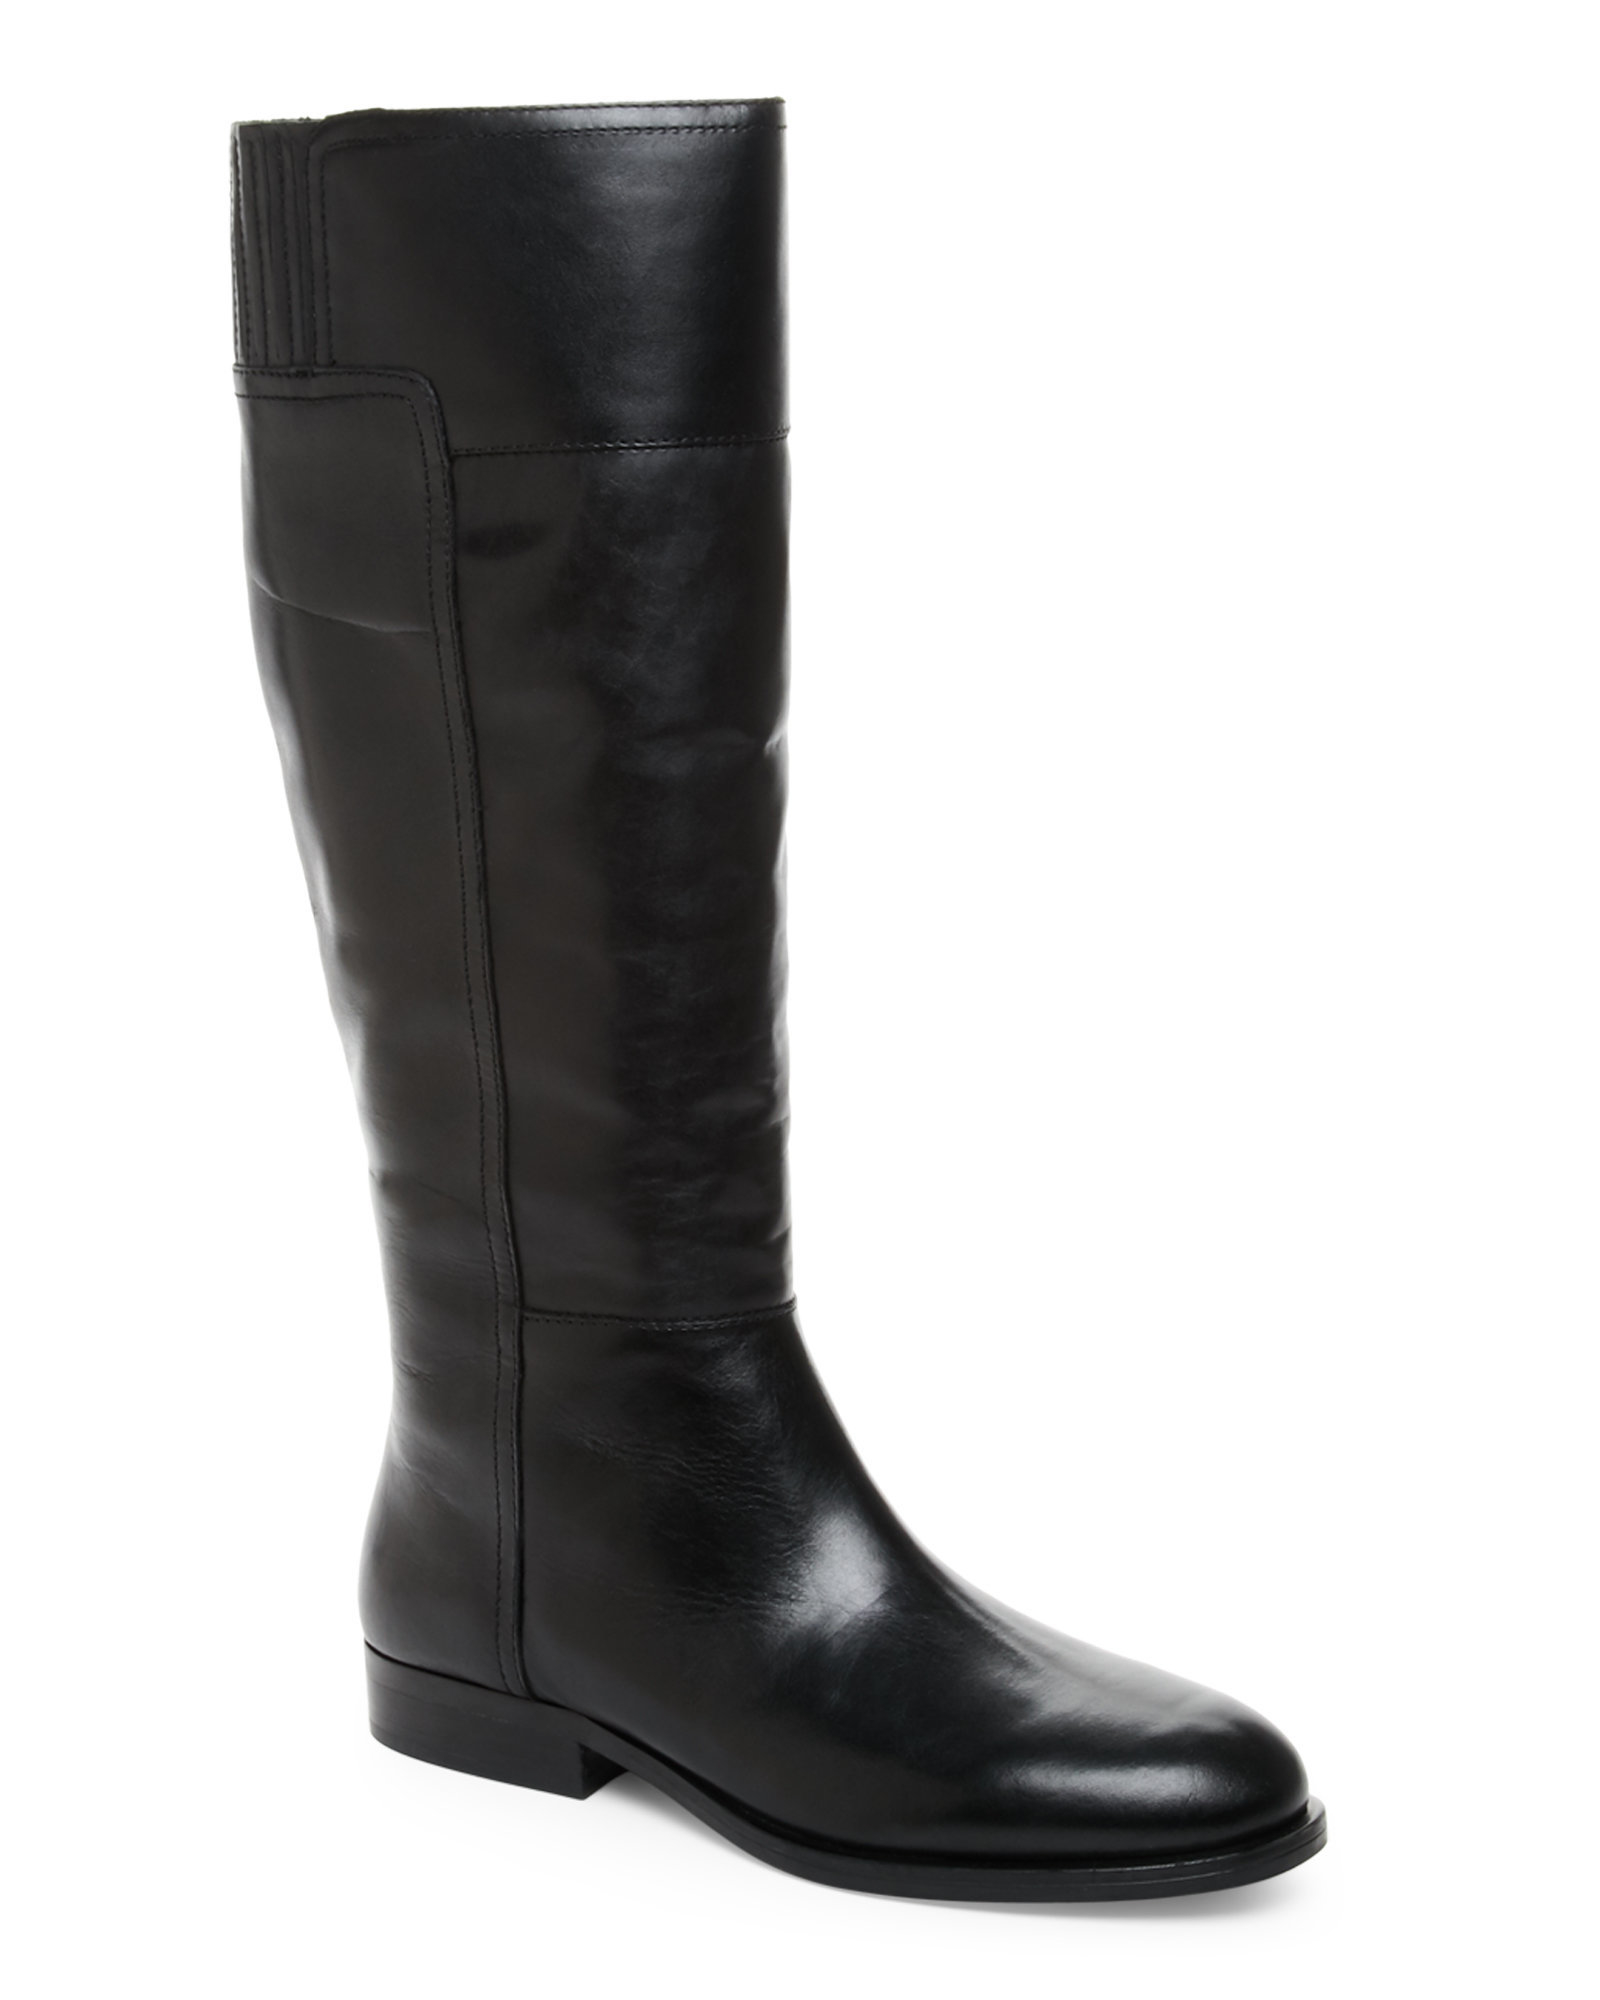 Nine west Black Varee Flat Riding Boots in Black - Save 59% | Lyst